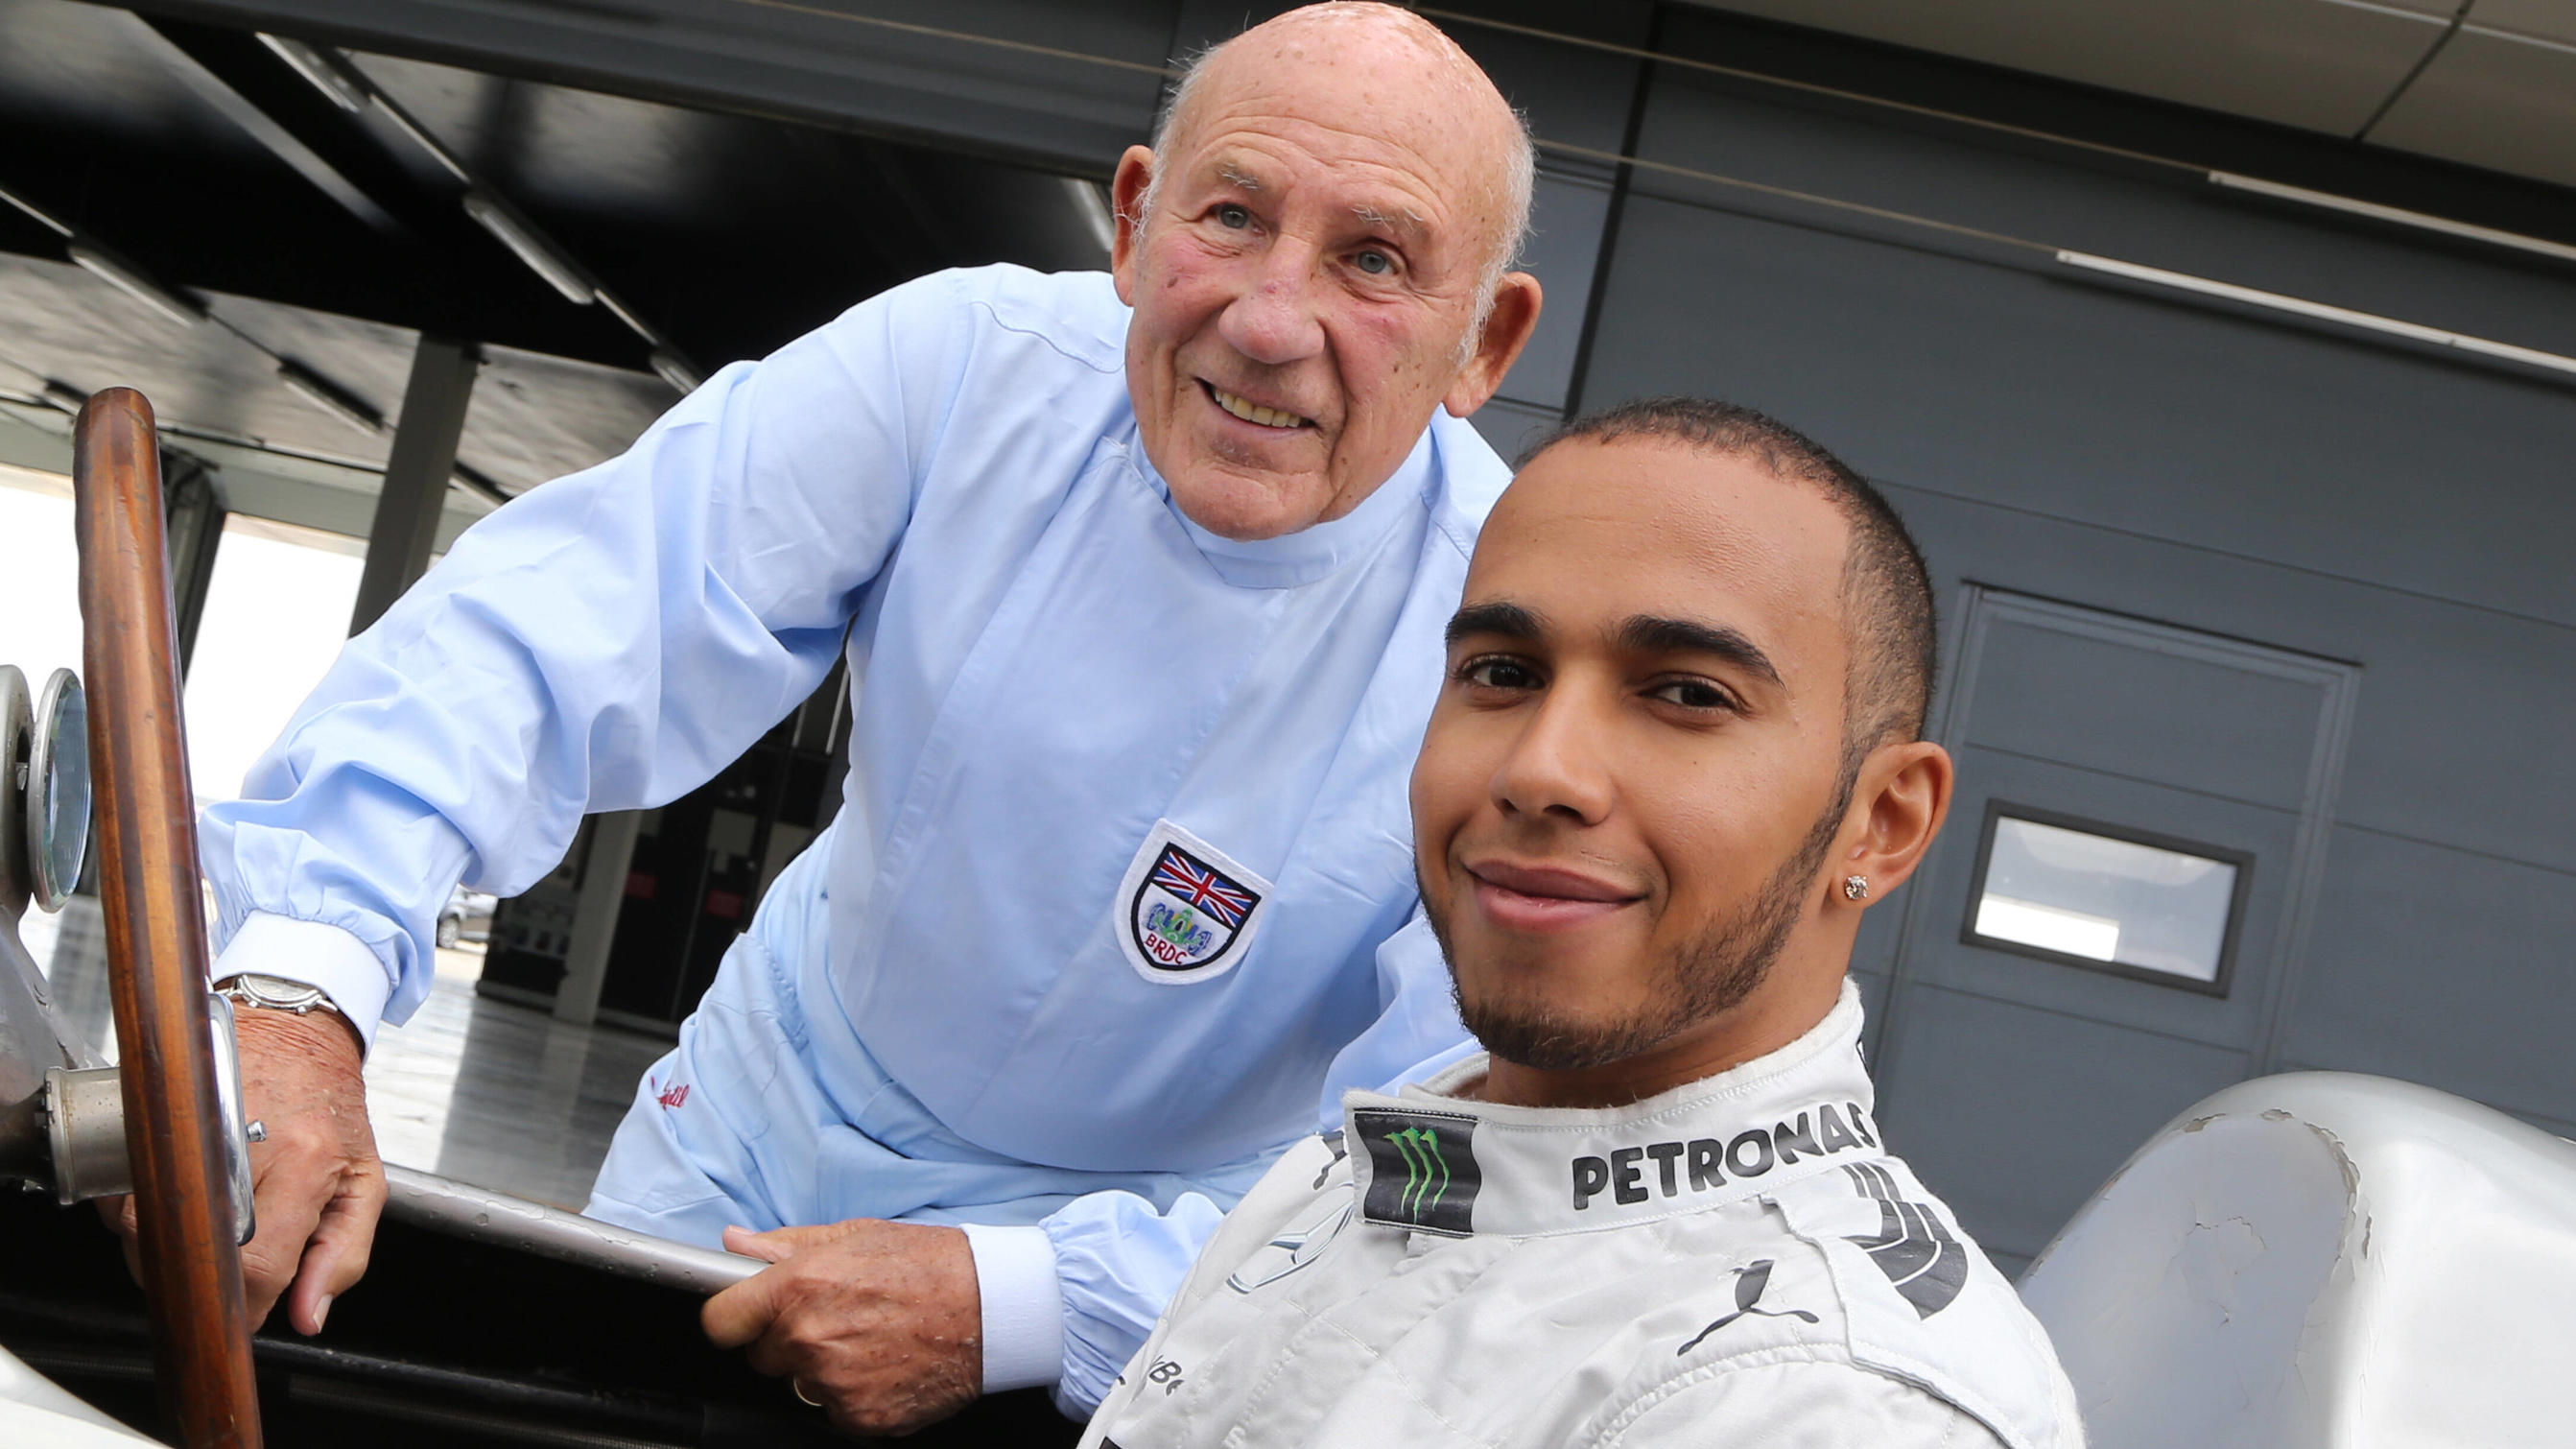  British GP preview with Lewis Hamilton and Sir Stirling Moss, Silverstone, England, 31 May 2013. R to L: Sir Stirling Moss GBR and Lewis Hamilton GBR Mercedes AMG F1 with the double F1 Grand Prix winning Mercedes-Benz W196 at a press event to public